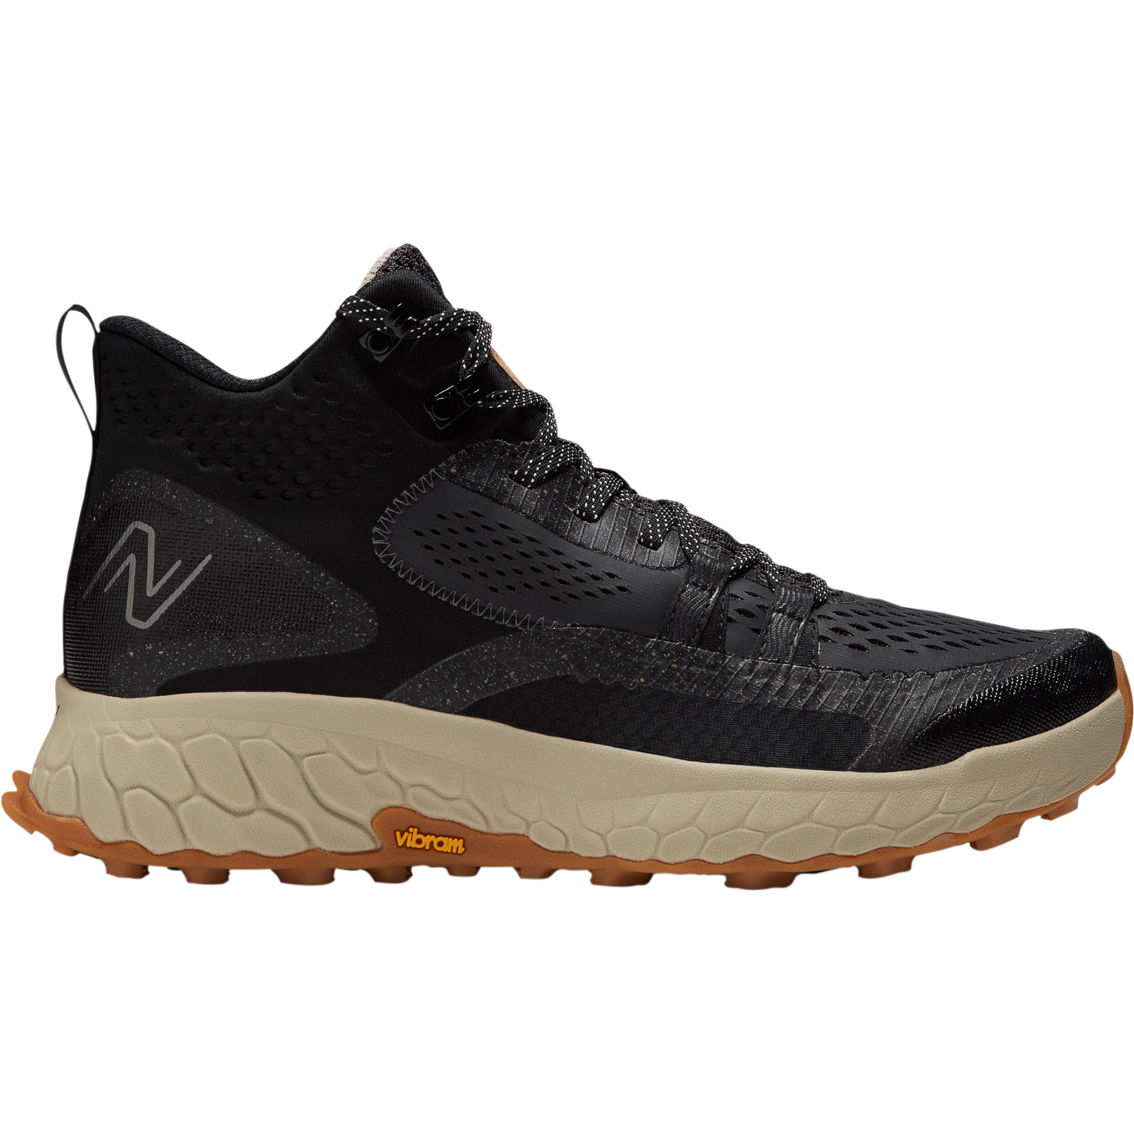 New Balance Men's Fresh Foam X Hierro Mid Hiking and Trail Running Shoes - Image 2 of 4